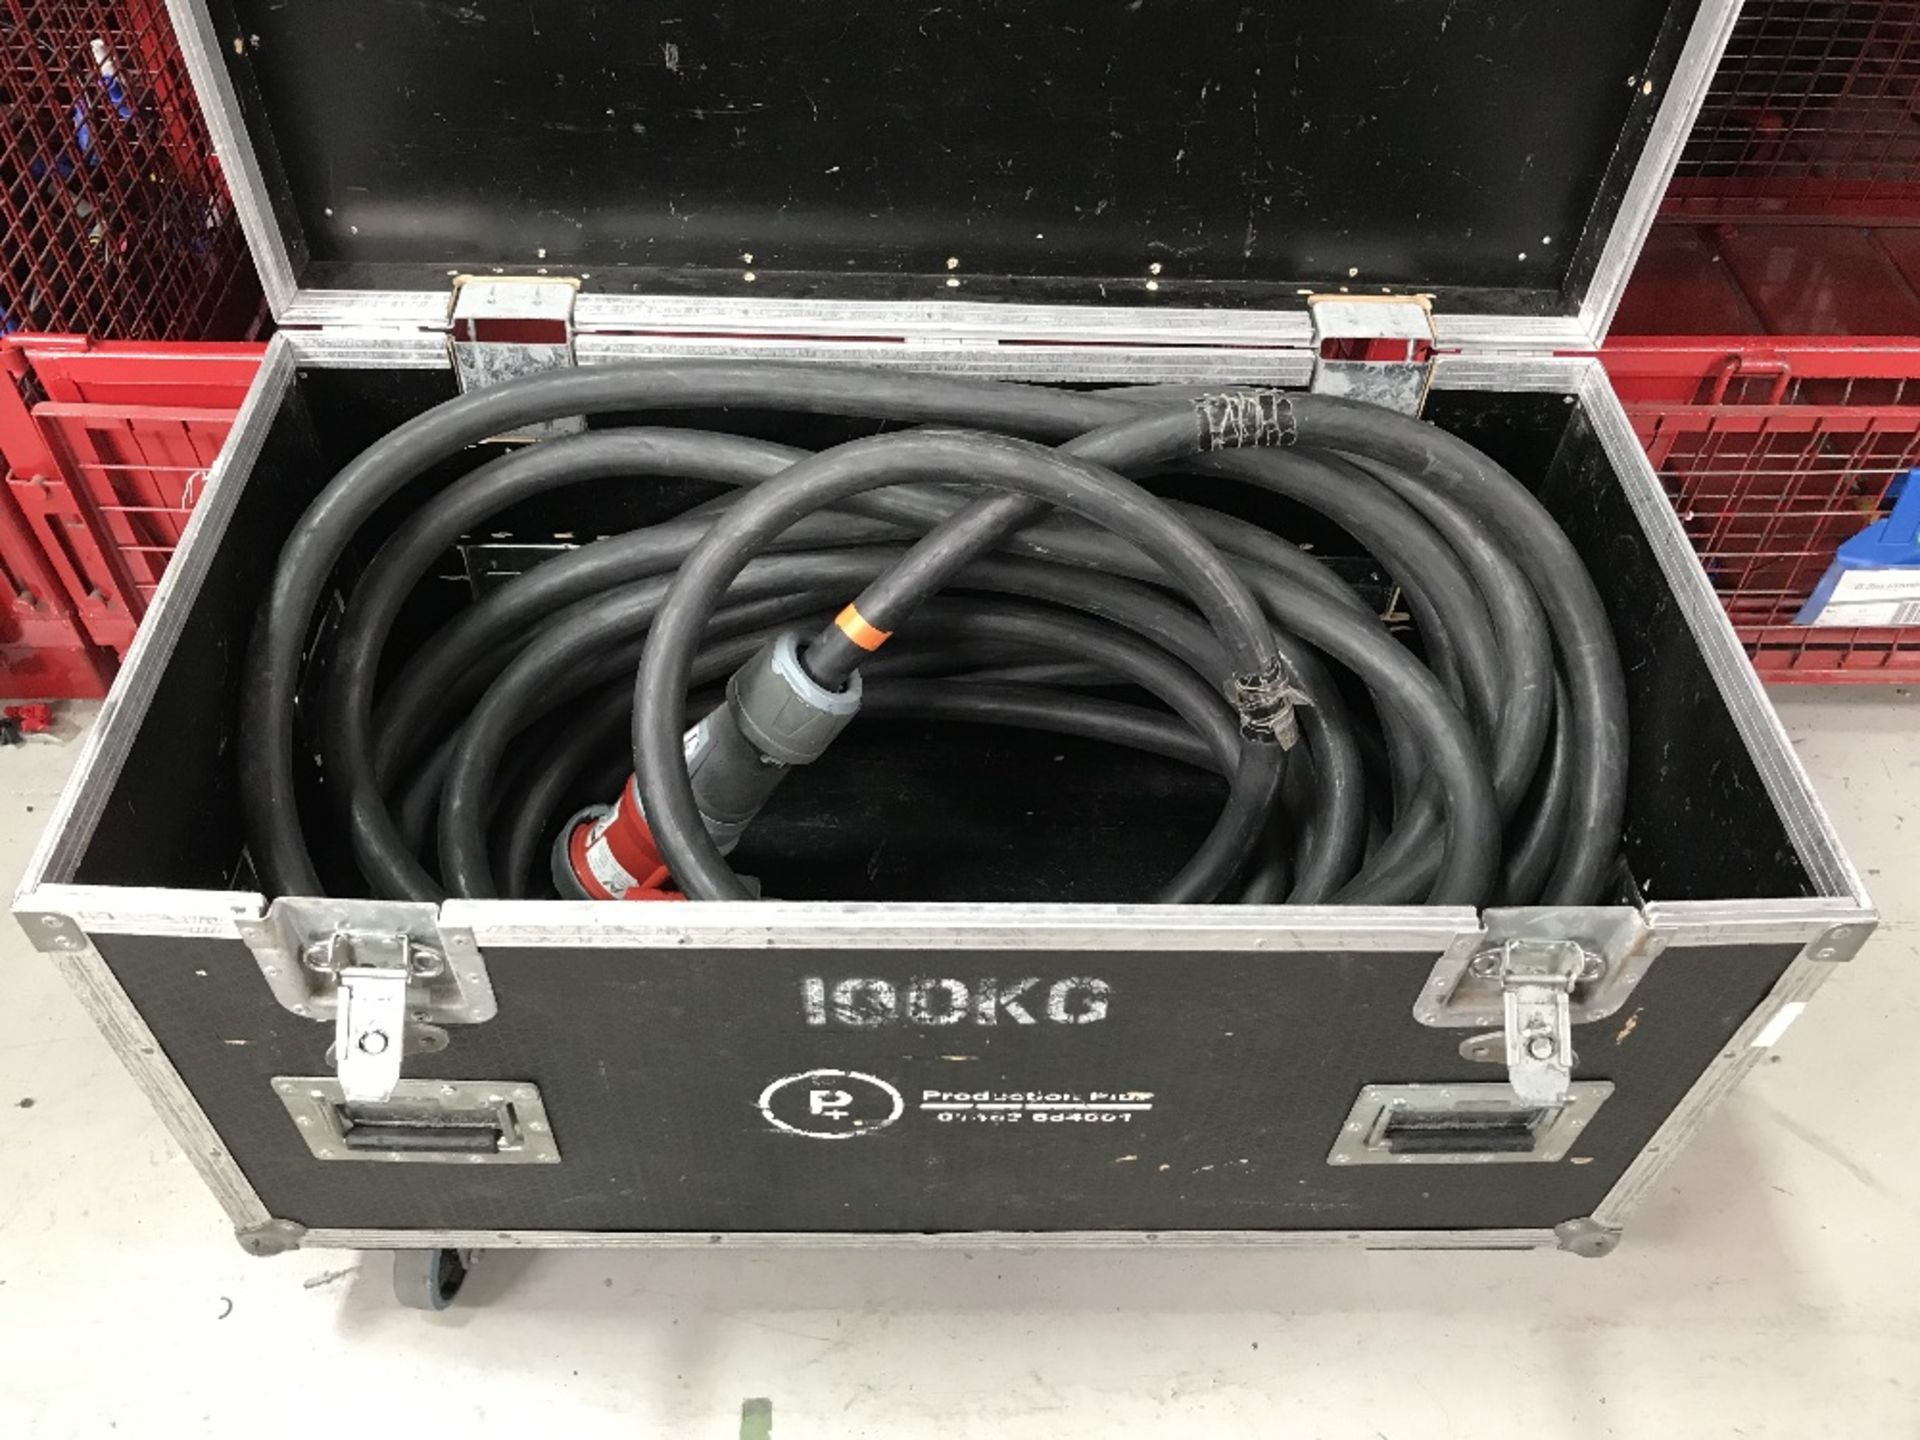 30m 125/3 Cable With Heavy Duty Mobile Flight Case